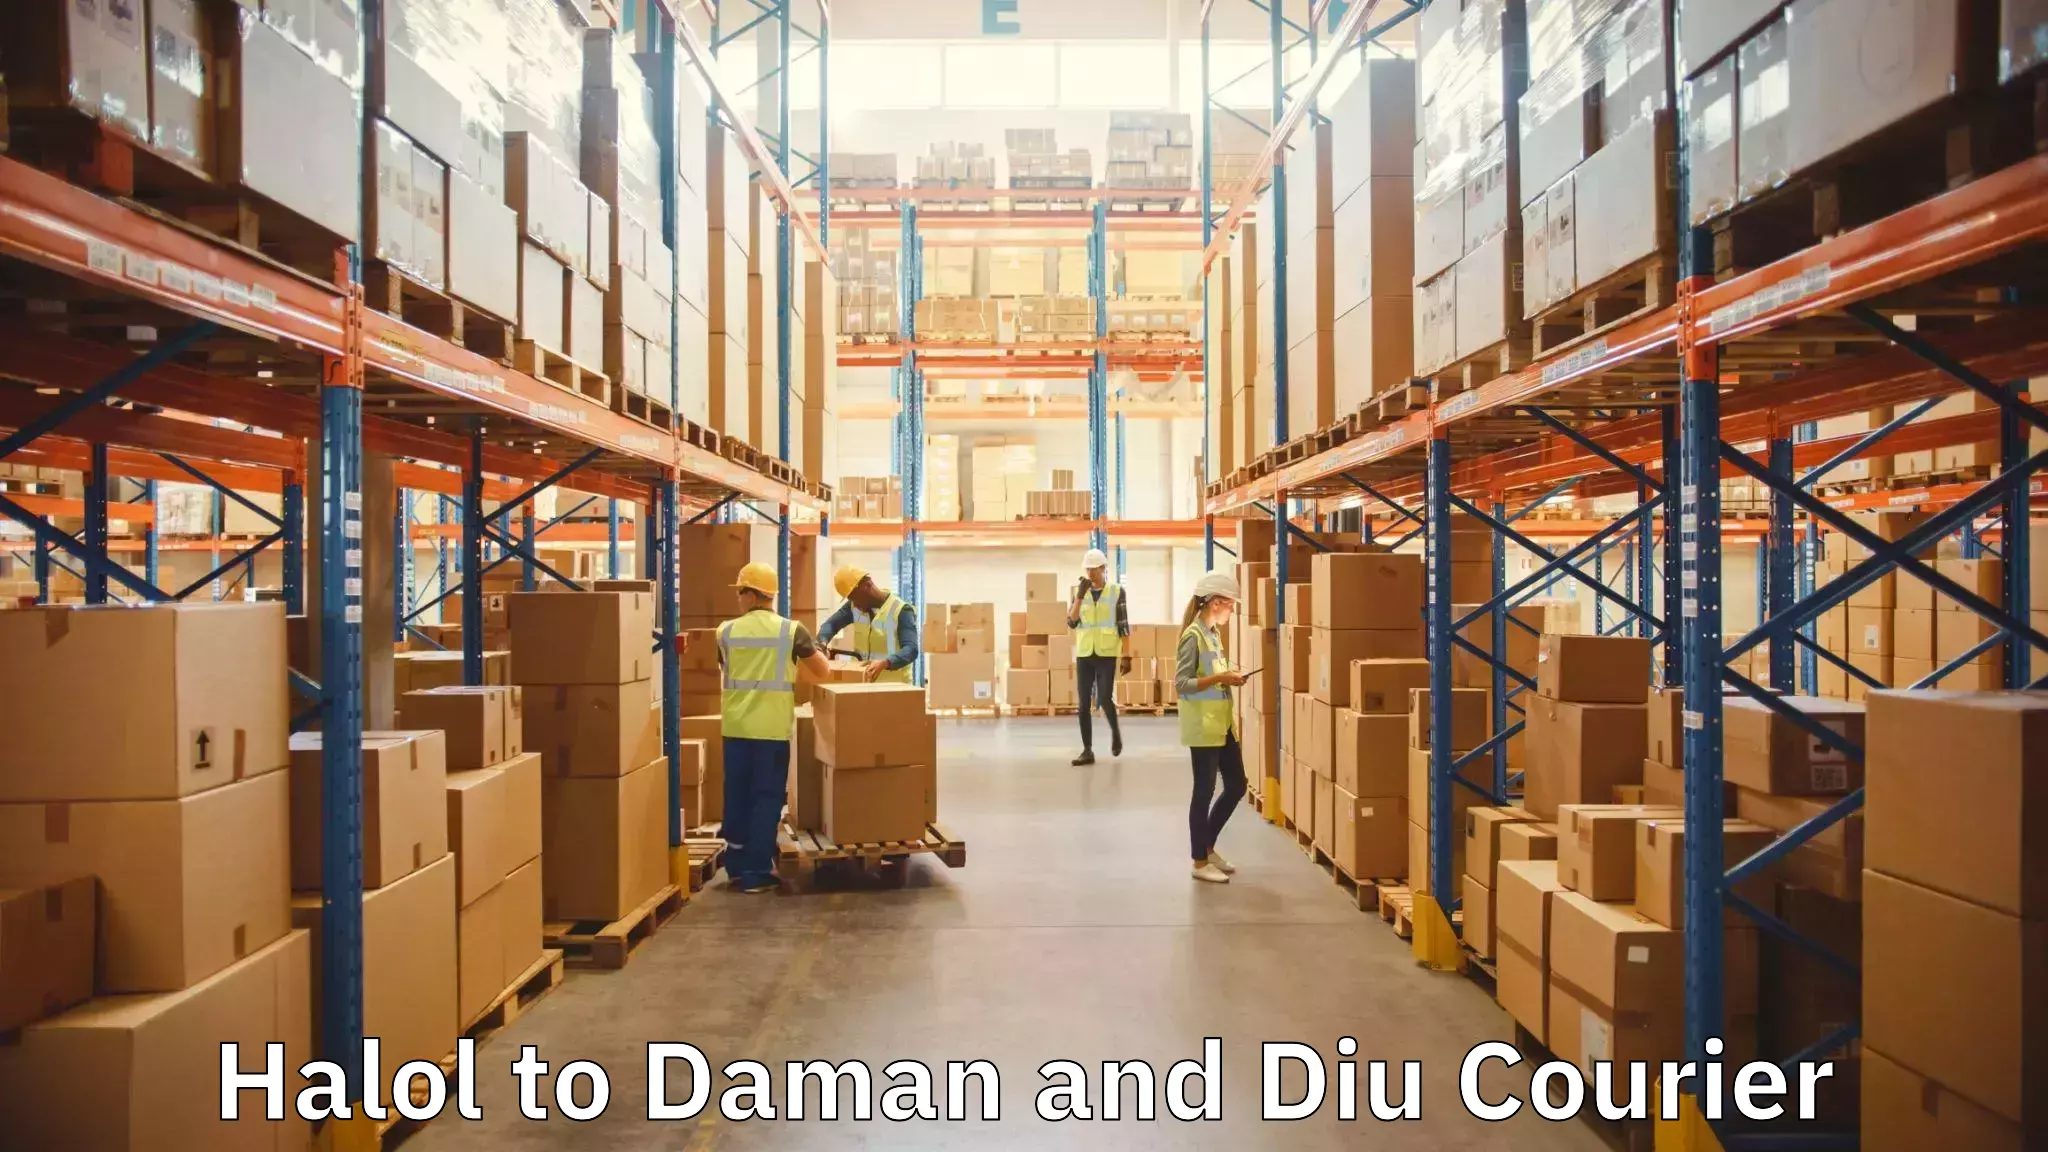 Hassle-free relocation Halol to Daman and Diu